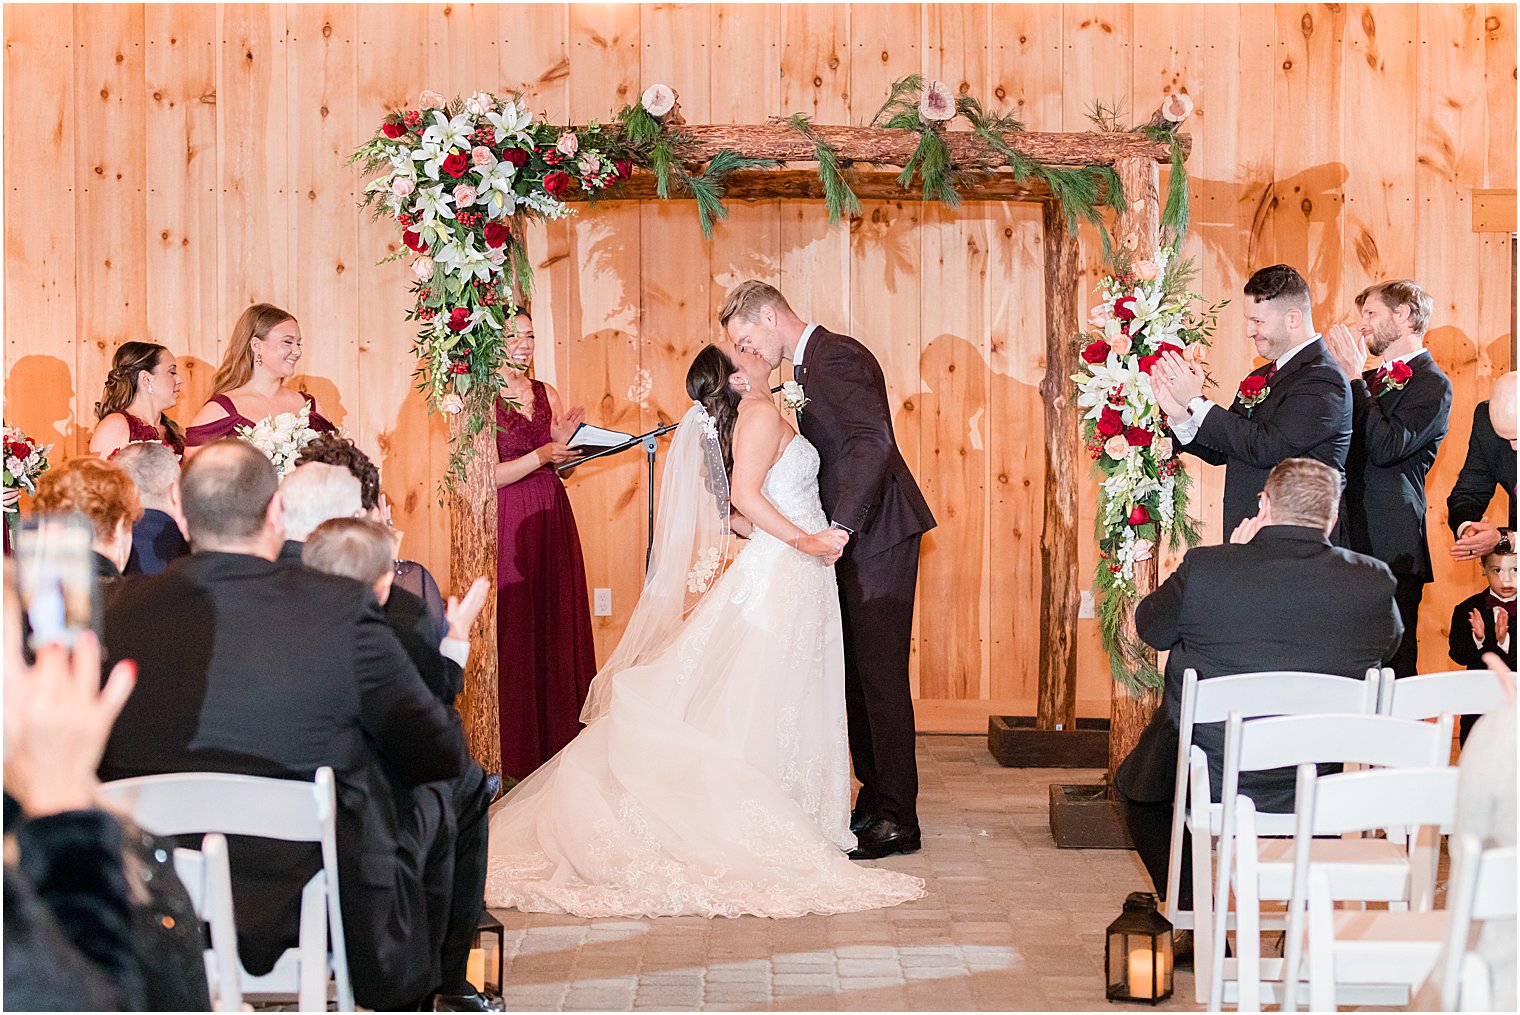 bride and groom kiss under wooden arbor at wedding ceremony in farmhouse